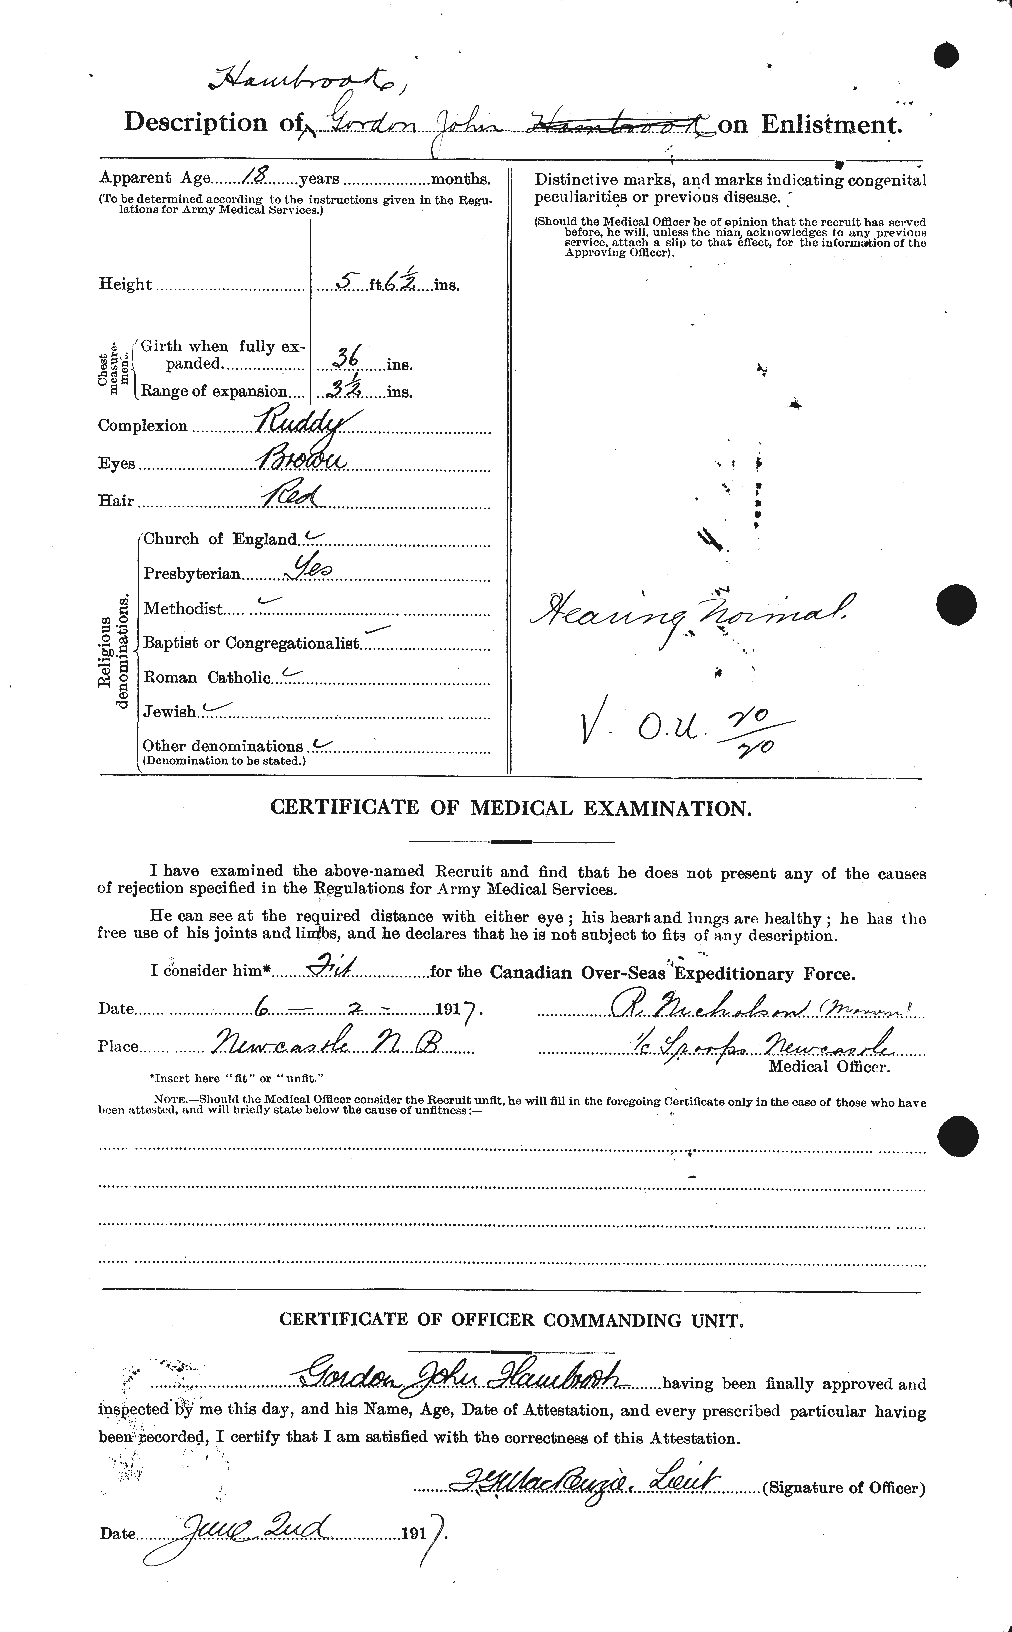 Personnel Records of the First World War - CEF 373846b